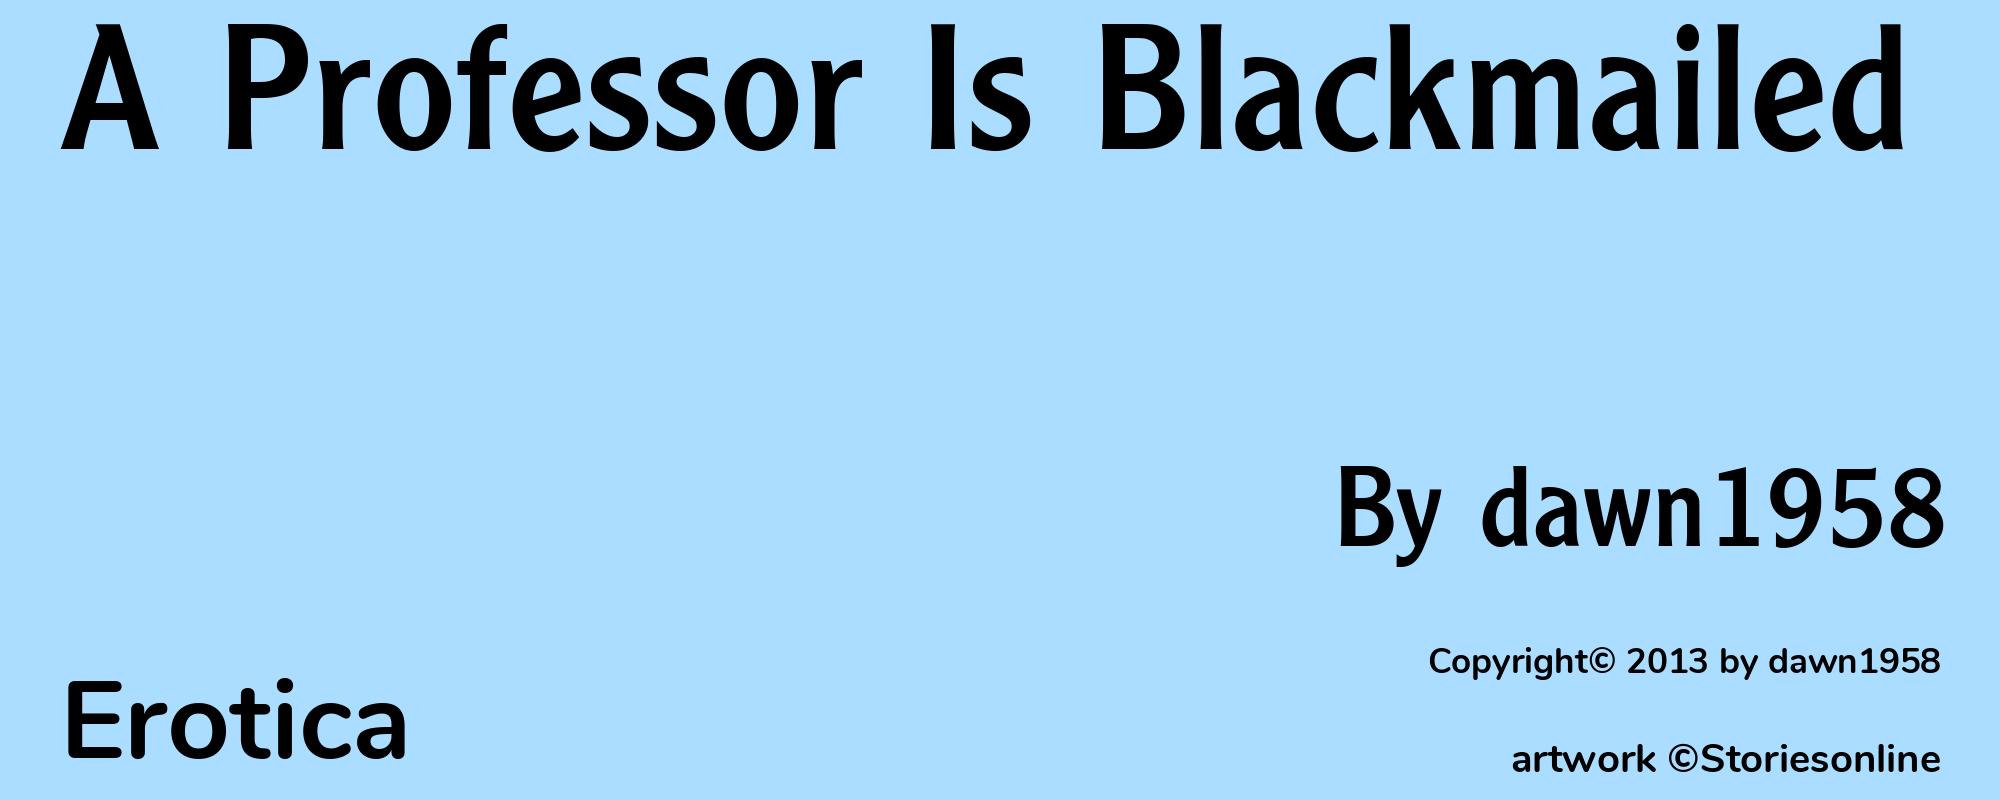 A Professor Is Blackmailed - Cover